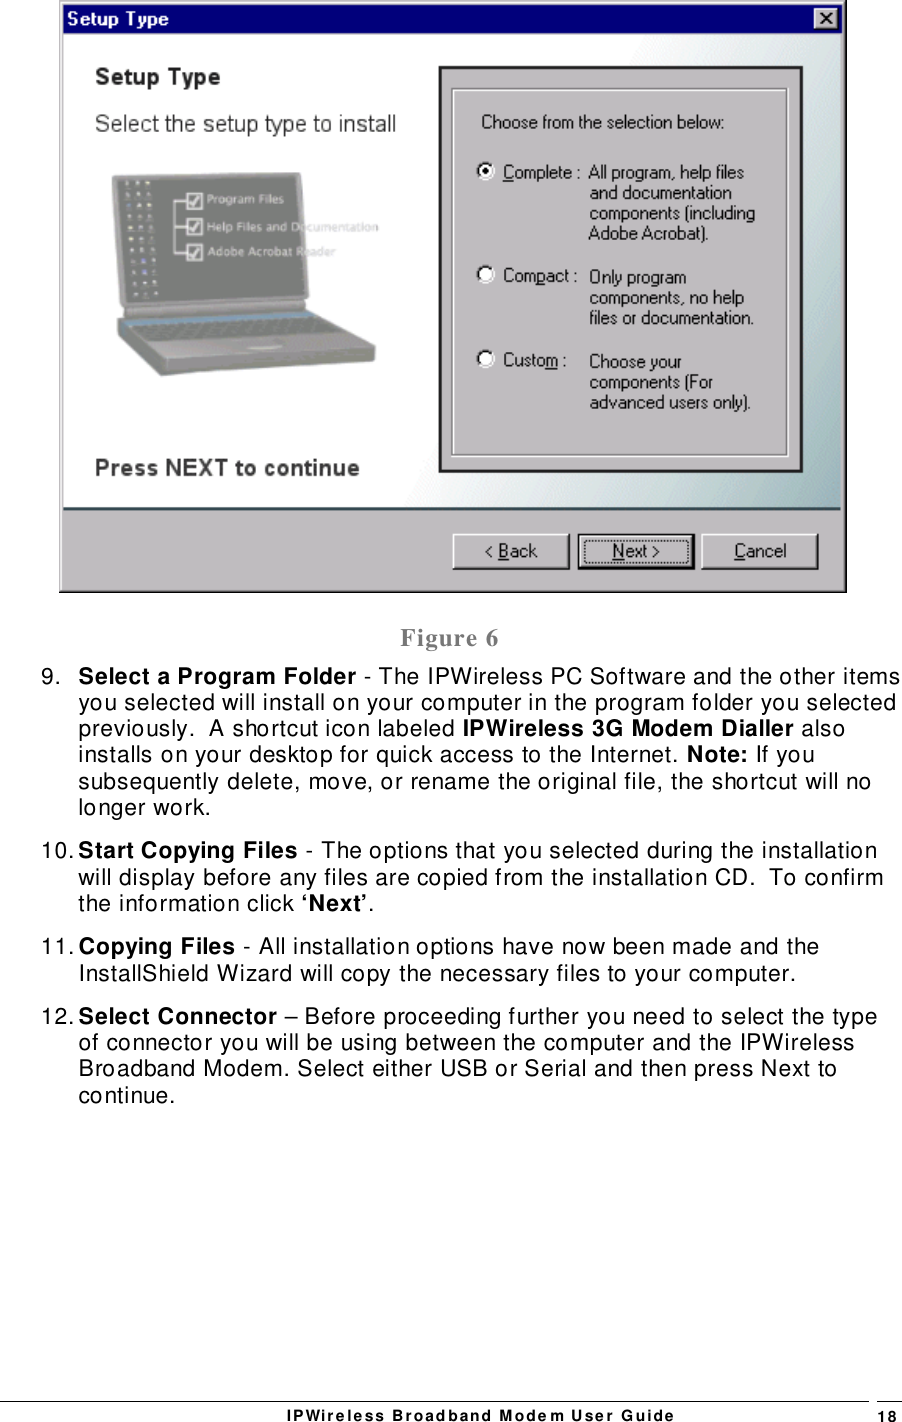 IPWireless Broadband Modem User Guide 18Figure 69.  Select a Program Folder - The IPWireless PC Software and the other itemsyou selected will install on your computer in the program folder you selectedpreviously.  A shortcut icon labeled IPWireless 3G Modem Dialler alsoinstalls on your desktop for quick access to the Internet. Note: If yousubsequently delete, move, or rename the original file, the shortcut will nolonger work.10. Start Copying Files - The options that you selected during the installationwill display before any files are copied from the installation CD.  To confirmthe information click ‘Next’.11. Copying Files - All installation options have now been made and theInstallShield Wizard will copy the necessary files to your computer.12. Select Connector – Before proceeding further you need to select the typeof connector you will be using between the computer and the IPWirelessBroadband Modem. Select either USB or Serial and then press Next tocontinue.